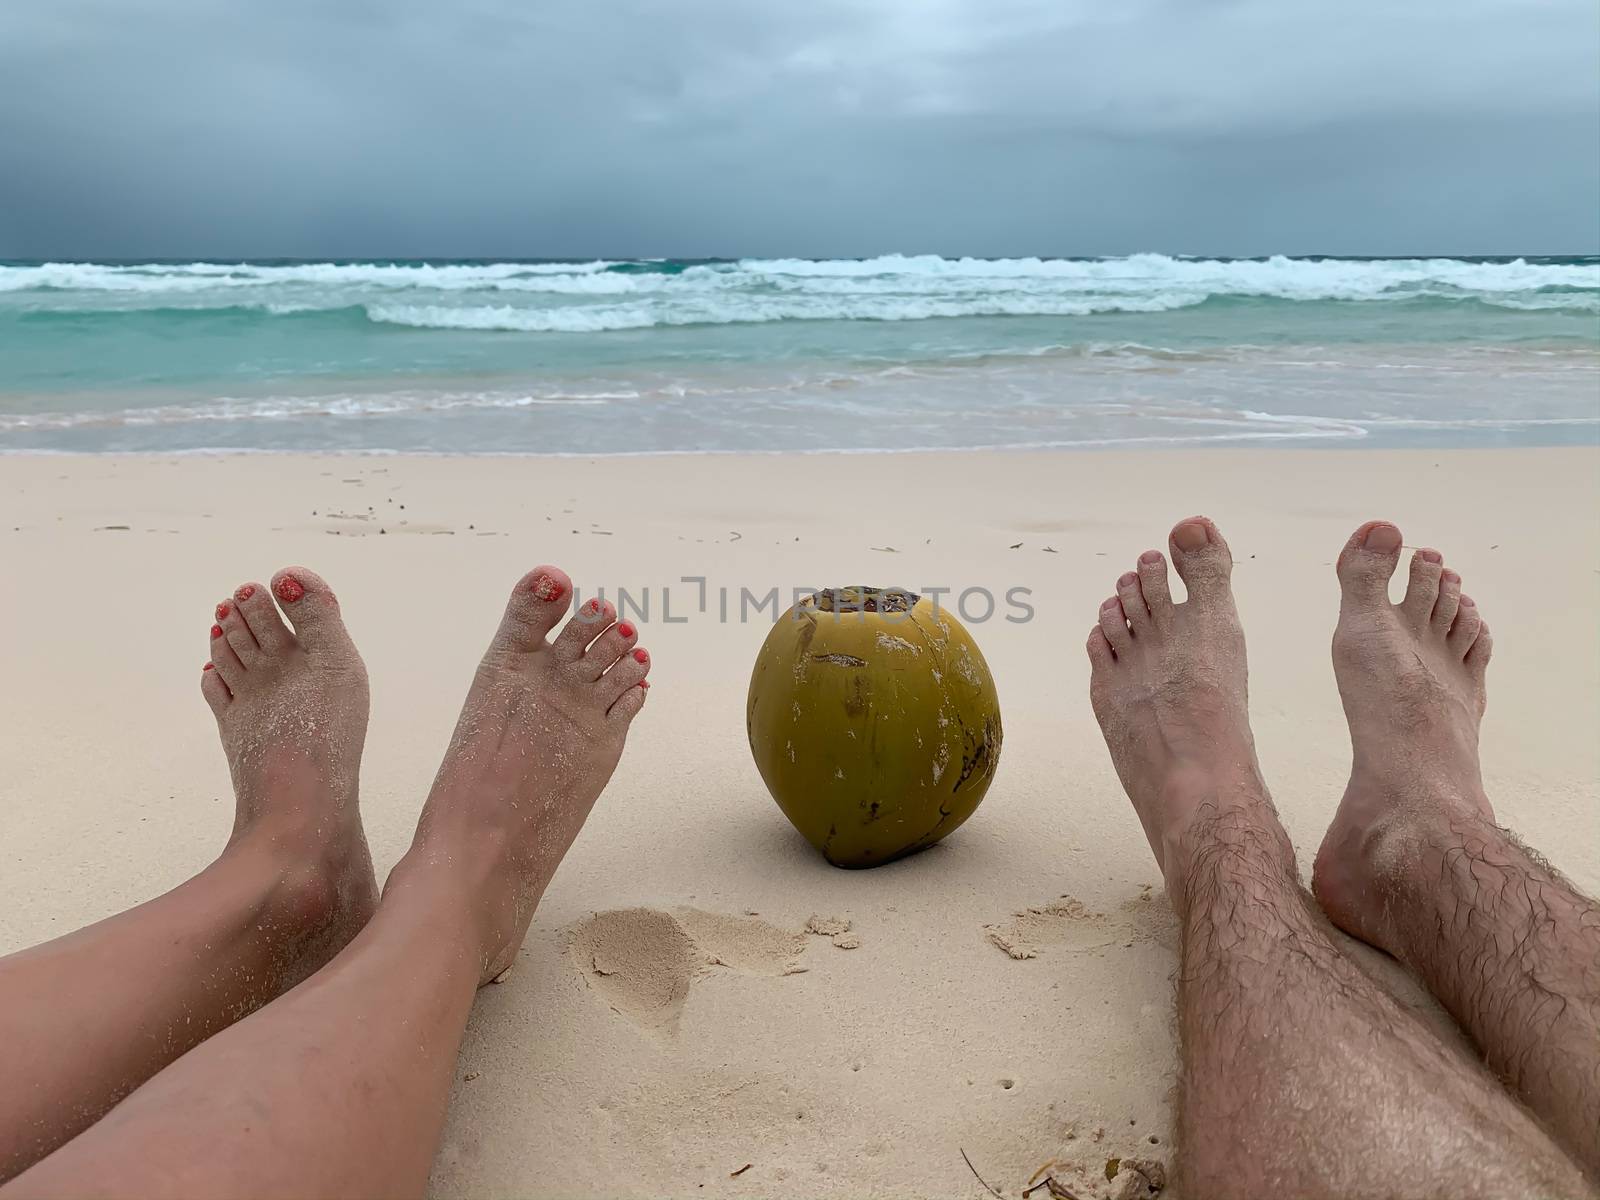 Two pairs of female and male legs with a coconut between them sitting on a white sand Caribbean beach on the ocean background on a cloudy day. Honeymoon image concept.